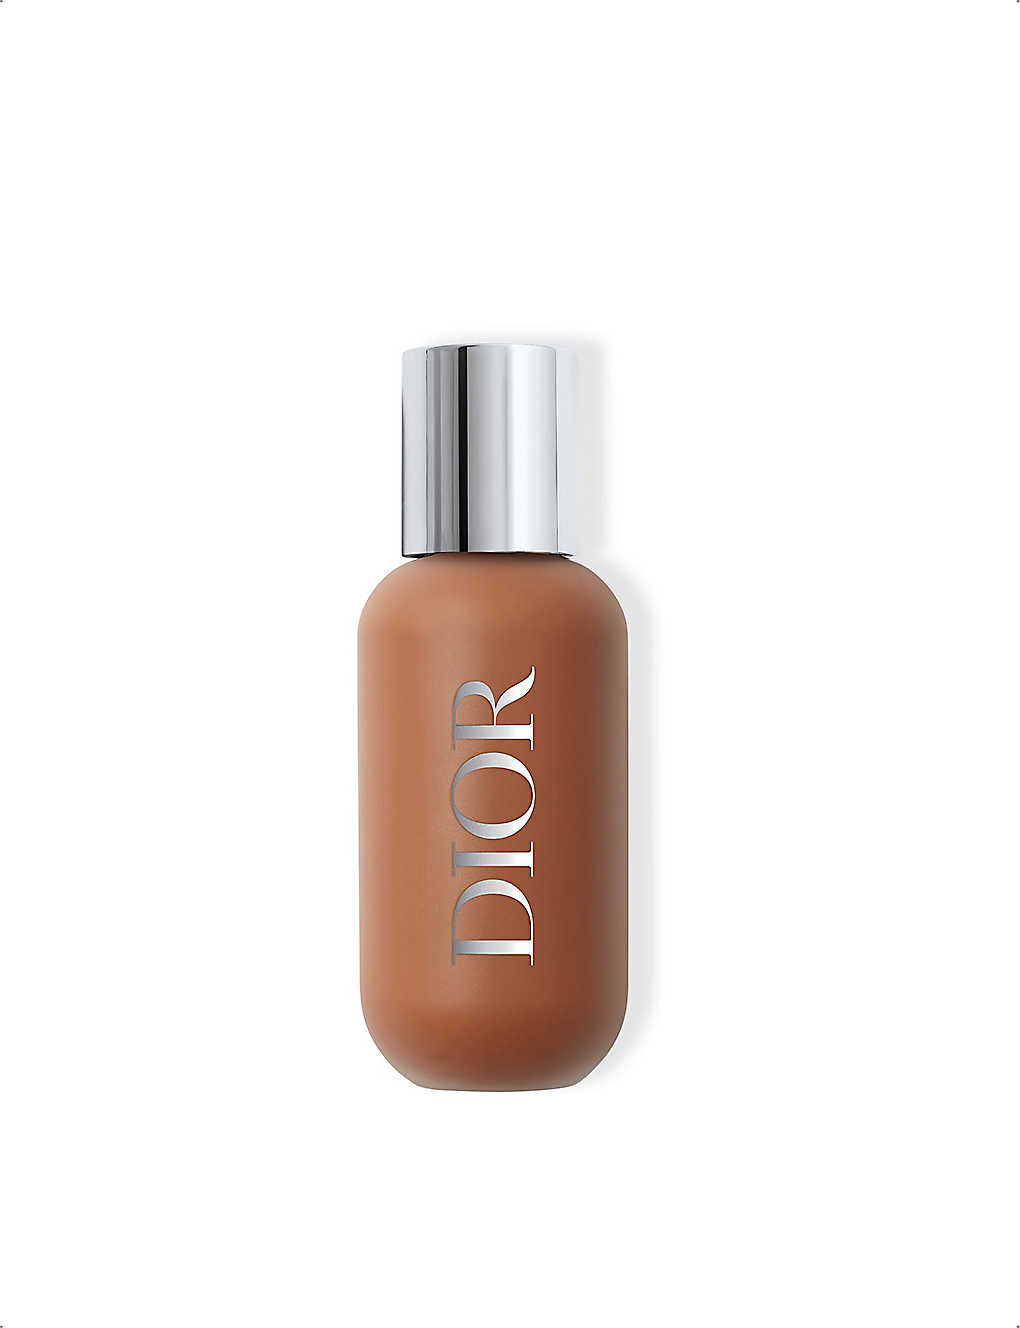 Dior Backstage Face & Body Foundation 50ml In 7n